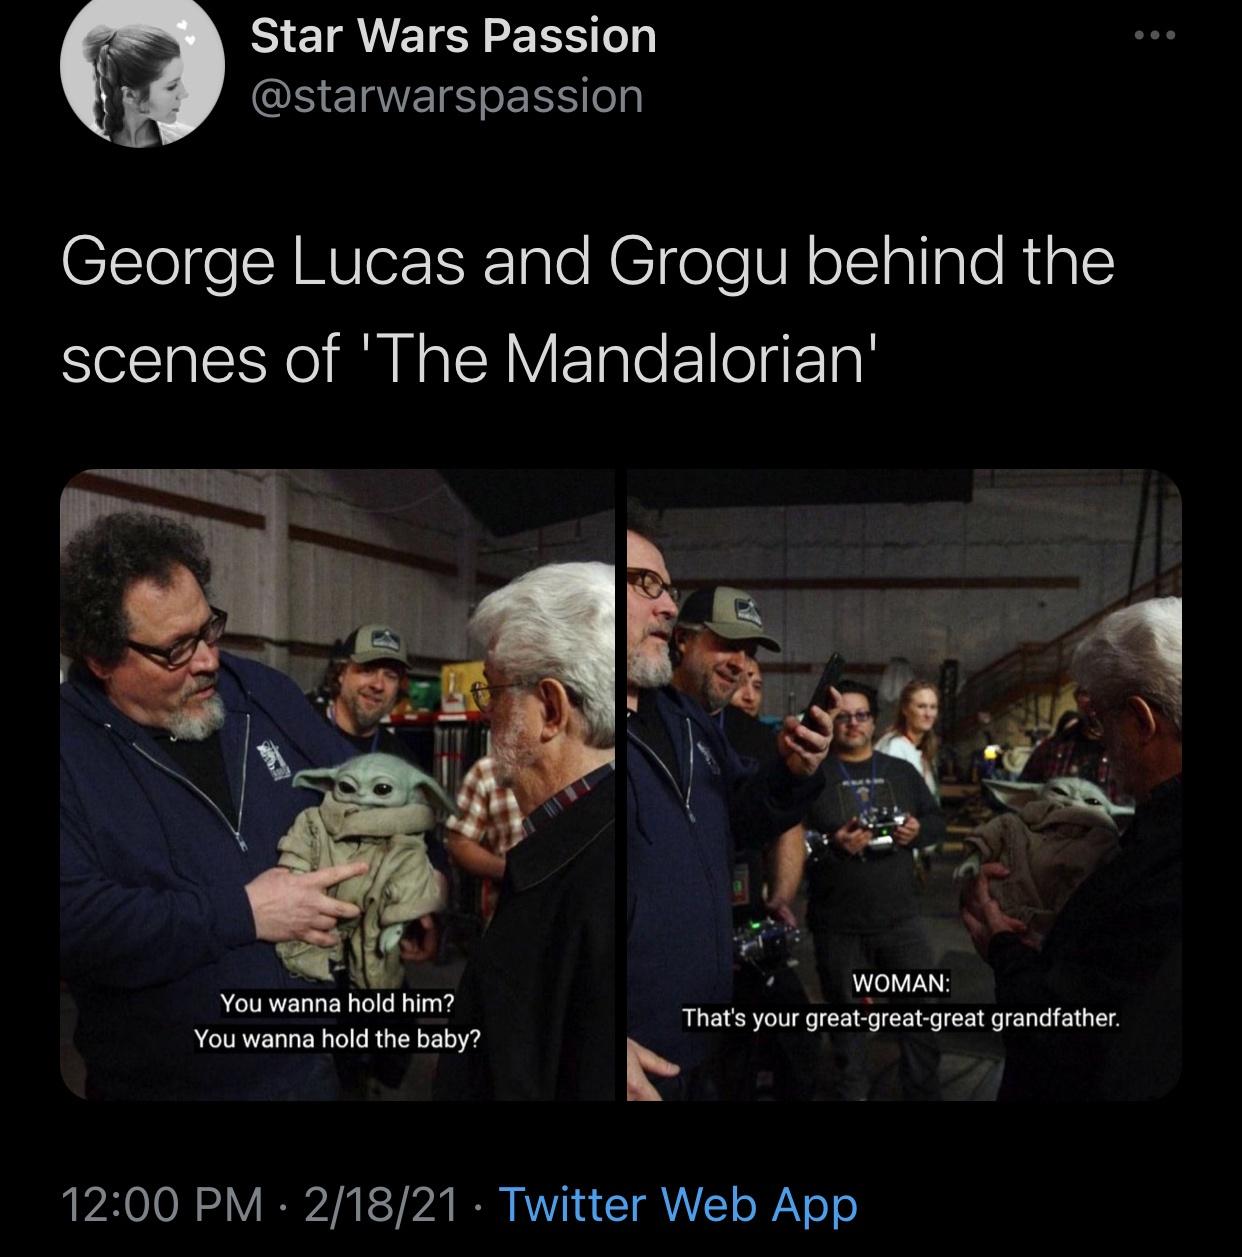 photo caption - Star Wars Passion George Lucas and Grogu behind the scenes of 'The Mandalorian' You wanna hold him? You wanna hold the baby? Woman That's your greatgreatgreat grandfather. 21821 Twitter Web App